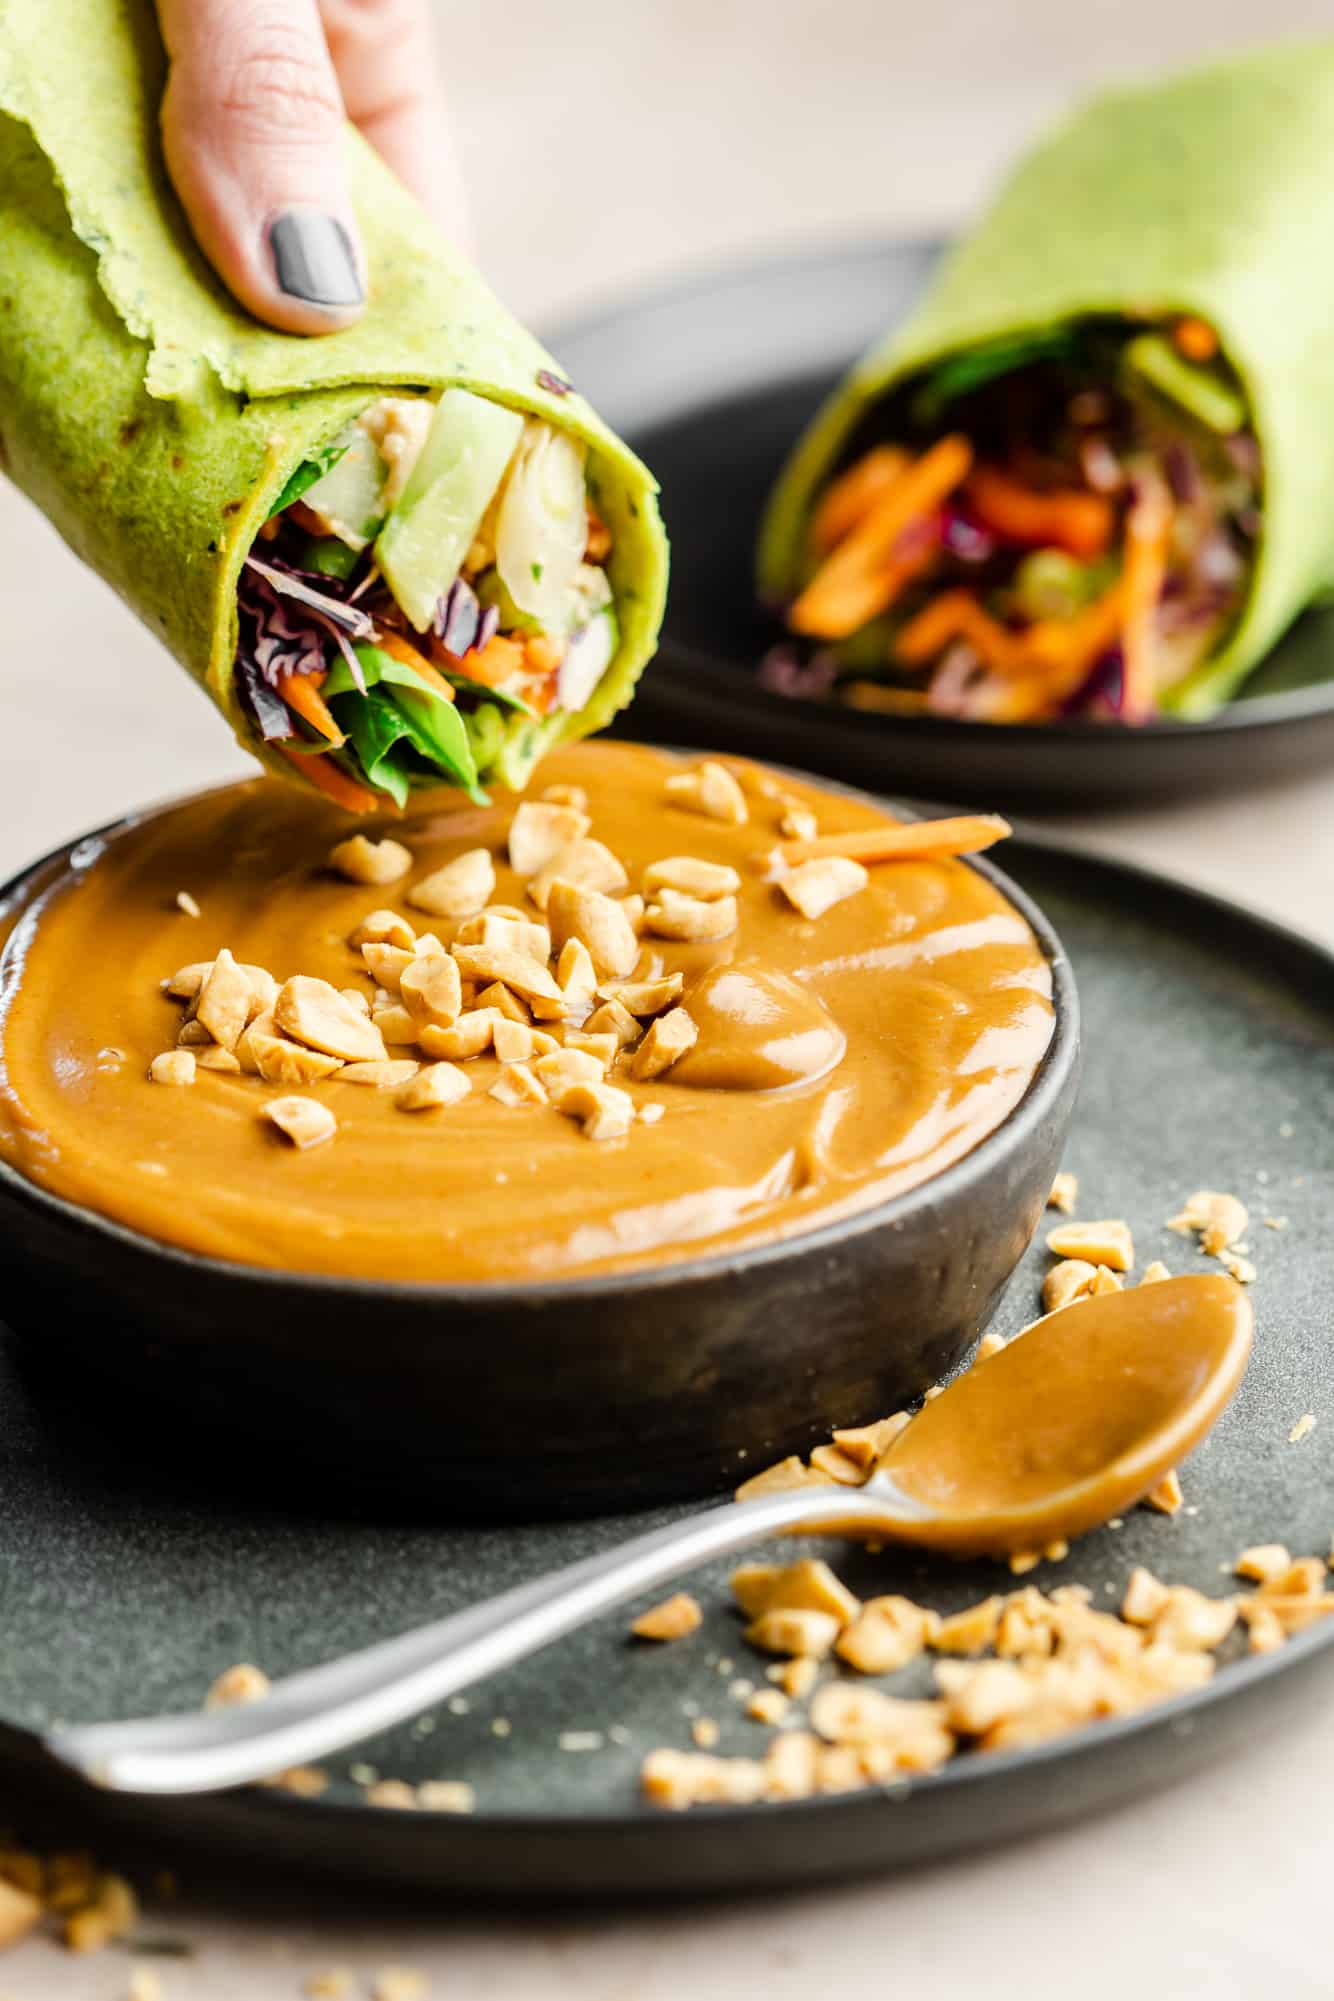 Dipping vegetable wraps in a bowl of peanut sauce.